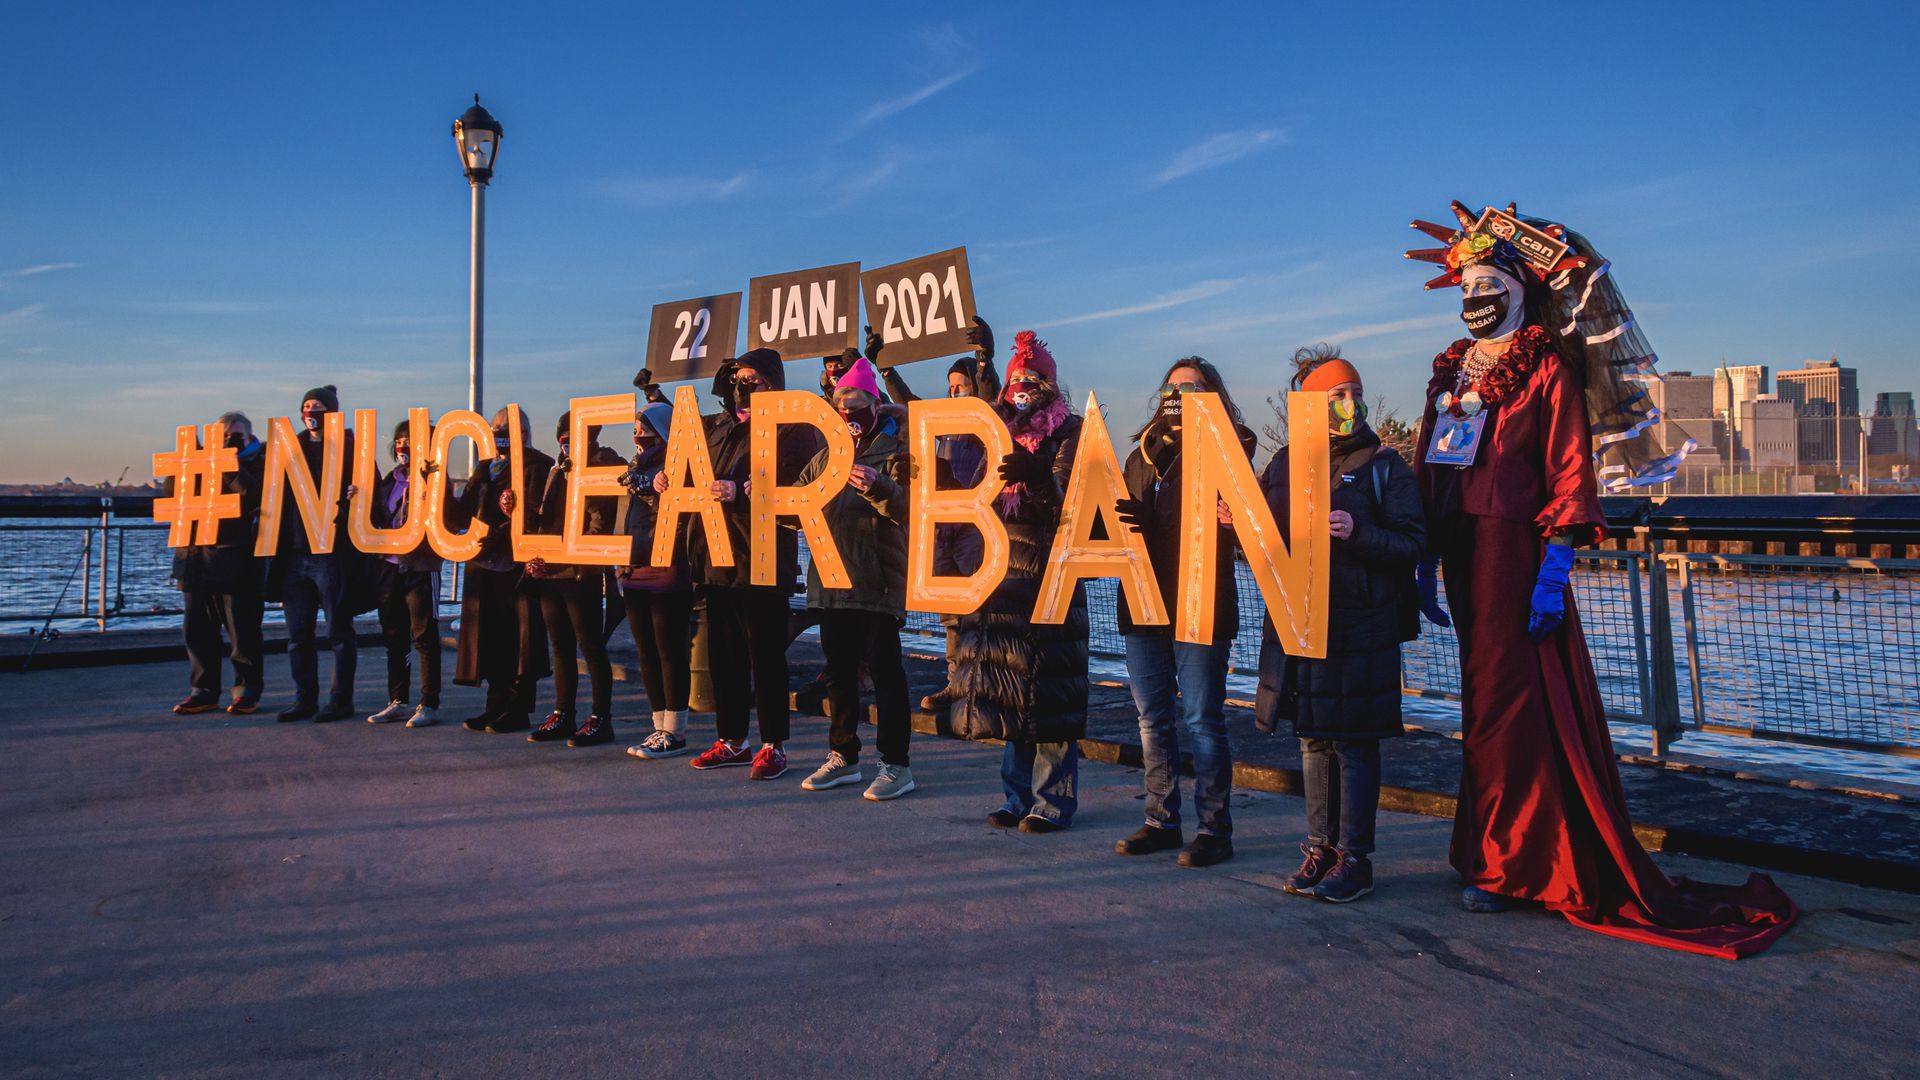 Protesters celebrate the Treaty on the Prohibition of Nuclear Weapons in New York on Jan. 22.